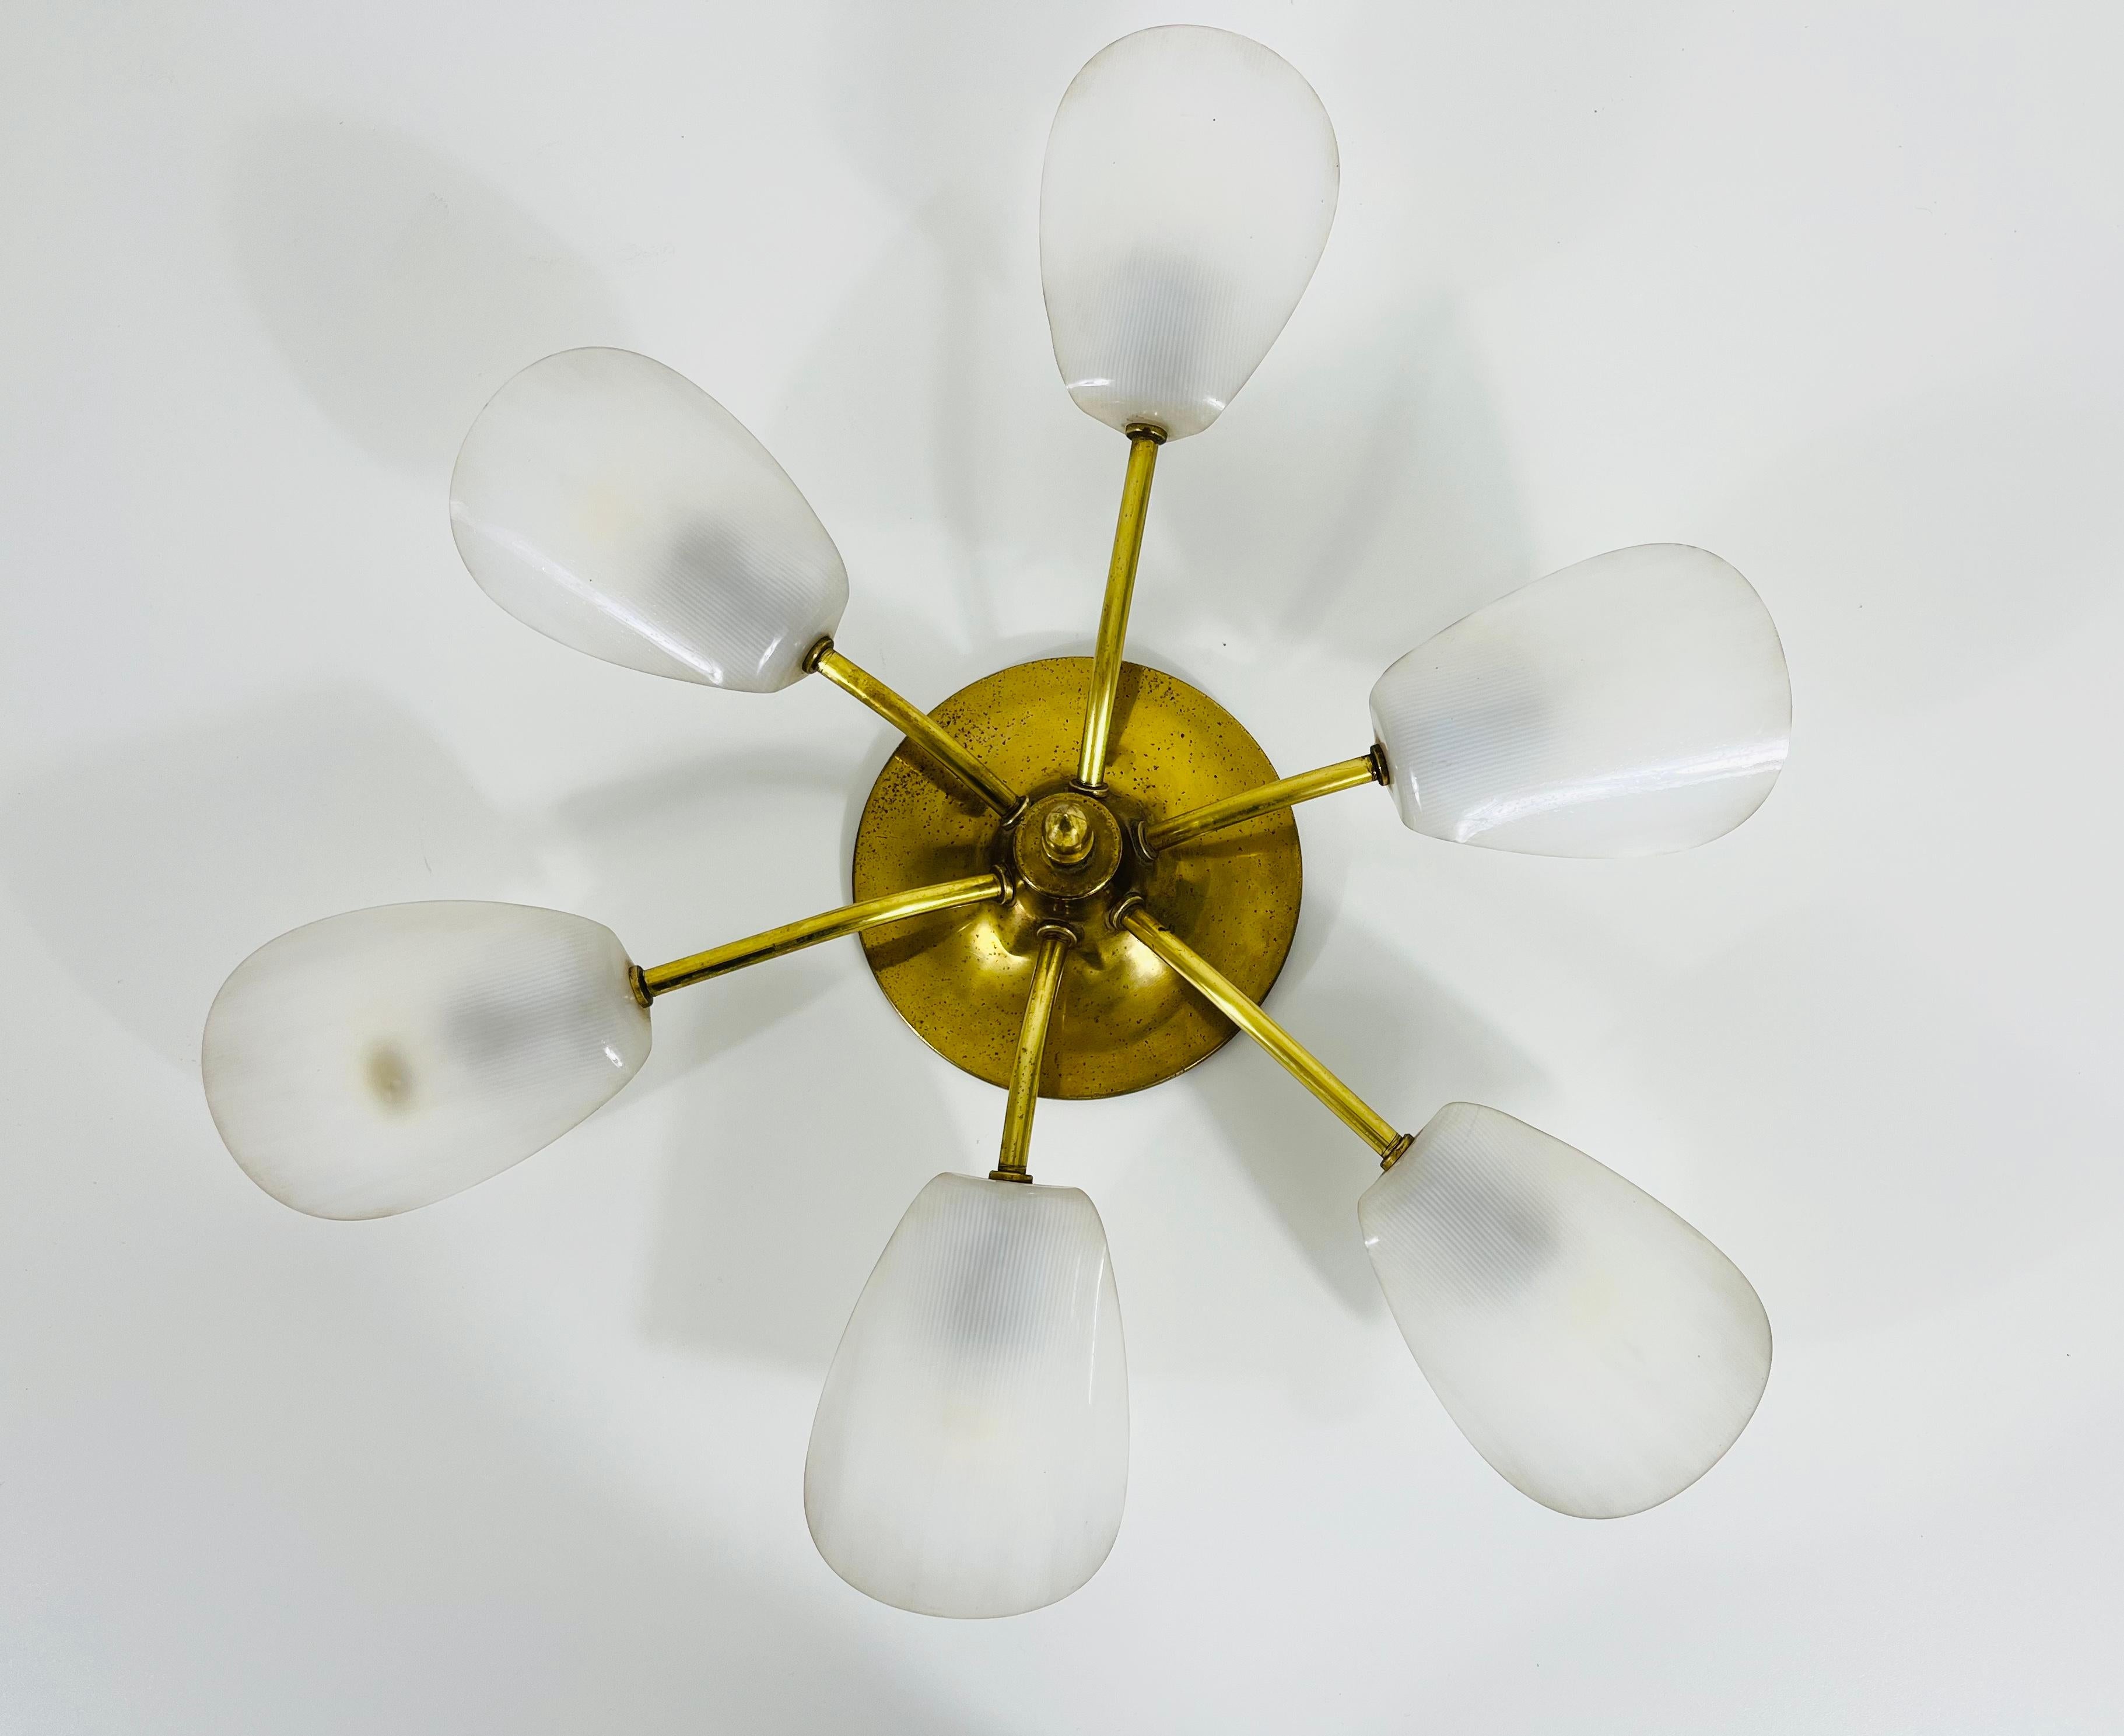 A Sputnik chandelier made in Italy in the 1950s. It is fascinating with its six brass arms with plastic shades, each of it with an E14 light bulb. The shape of the light is similar to a spider.

The light requires 6 E14 light bulbs. Good vintage